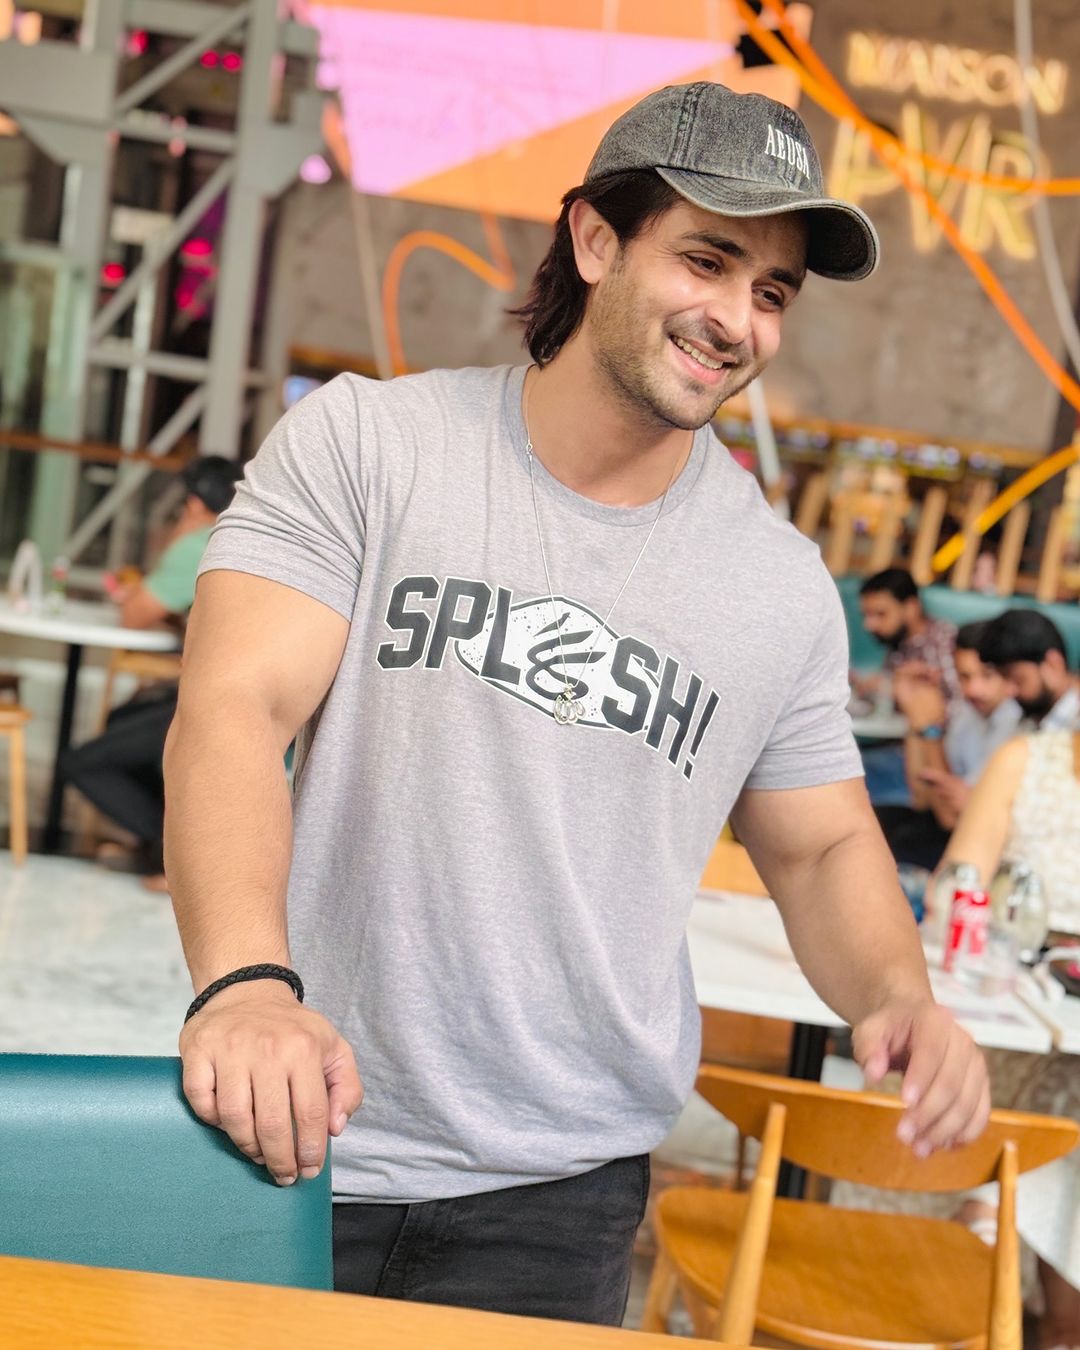 Where There Is No Struggle, There Is No Strength! Jhalak Dikhhla Jaa 11’s Shoaib Ibrahim Reveals His Early Struggles. Read On!